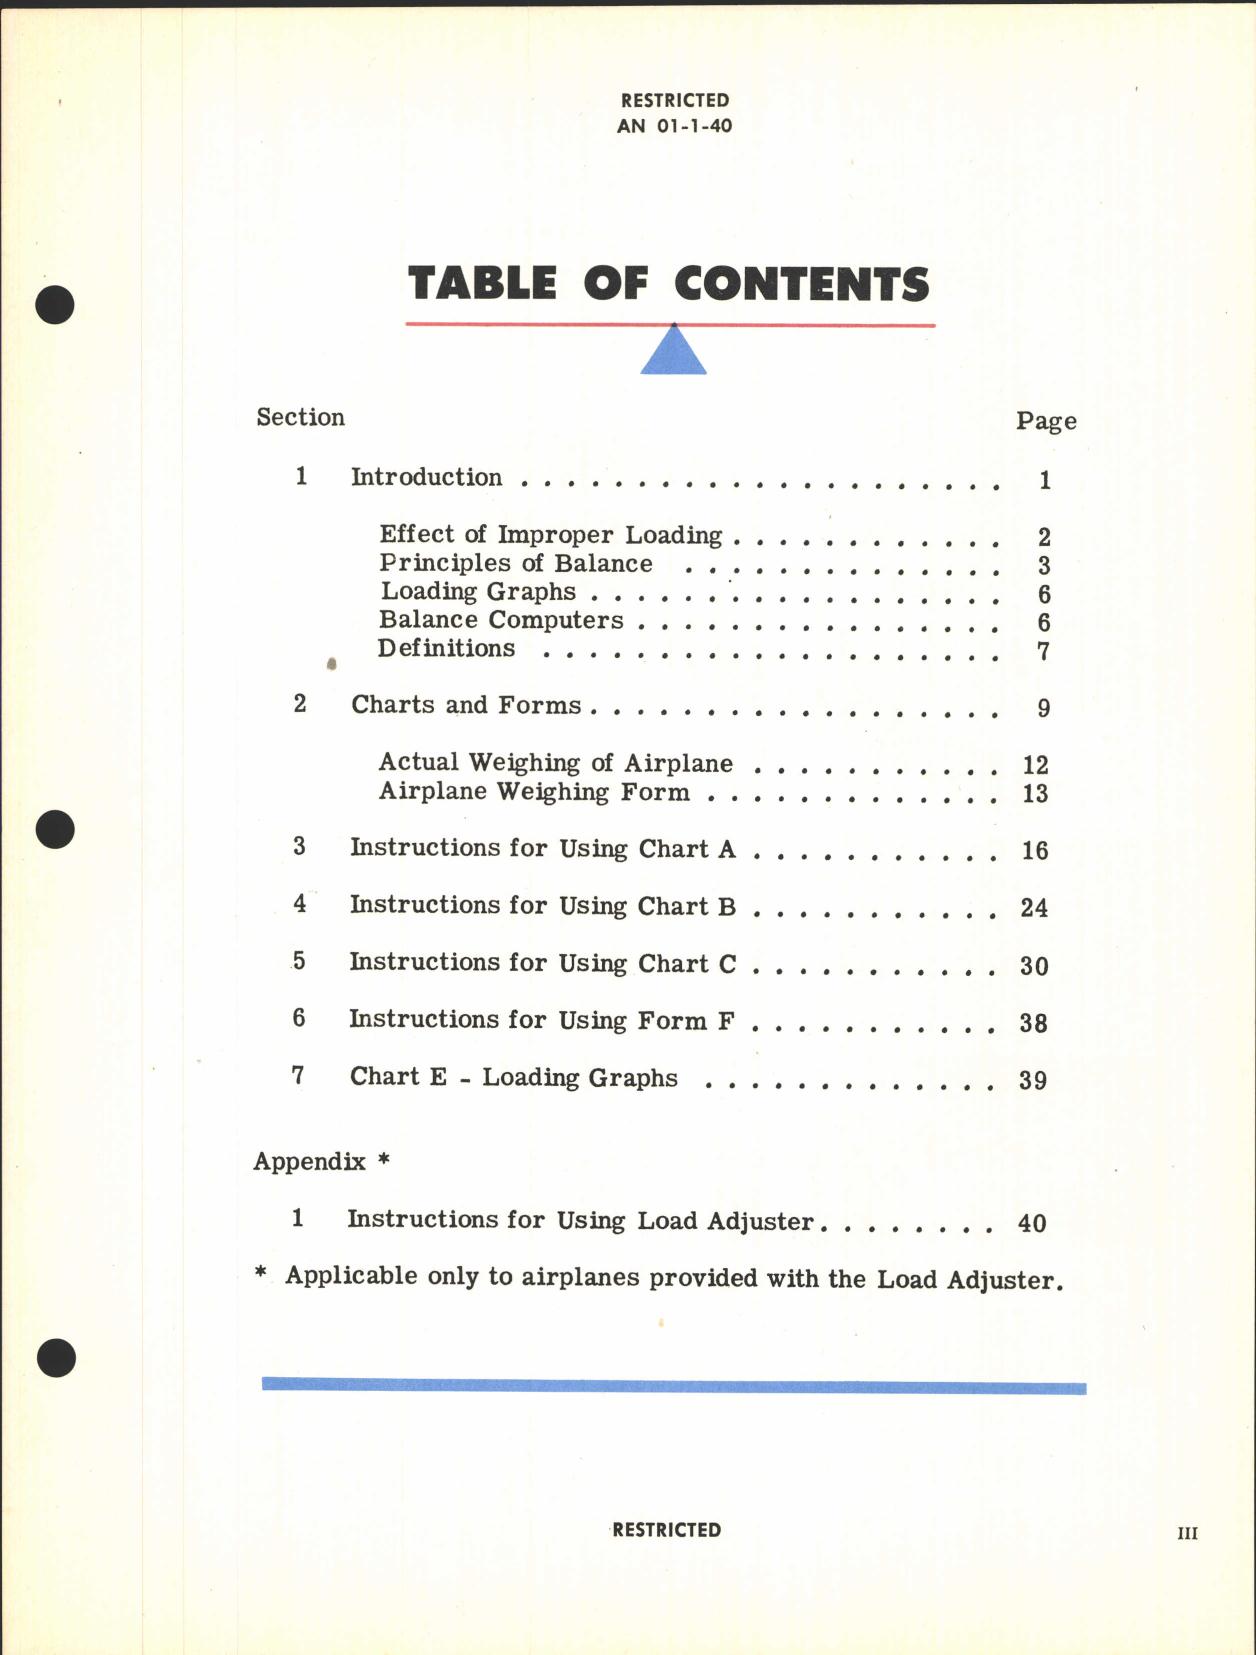 Sample page 7 from AirCorps Library document: Handbook of Weight and Balance Data